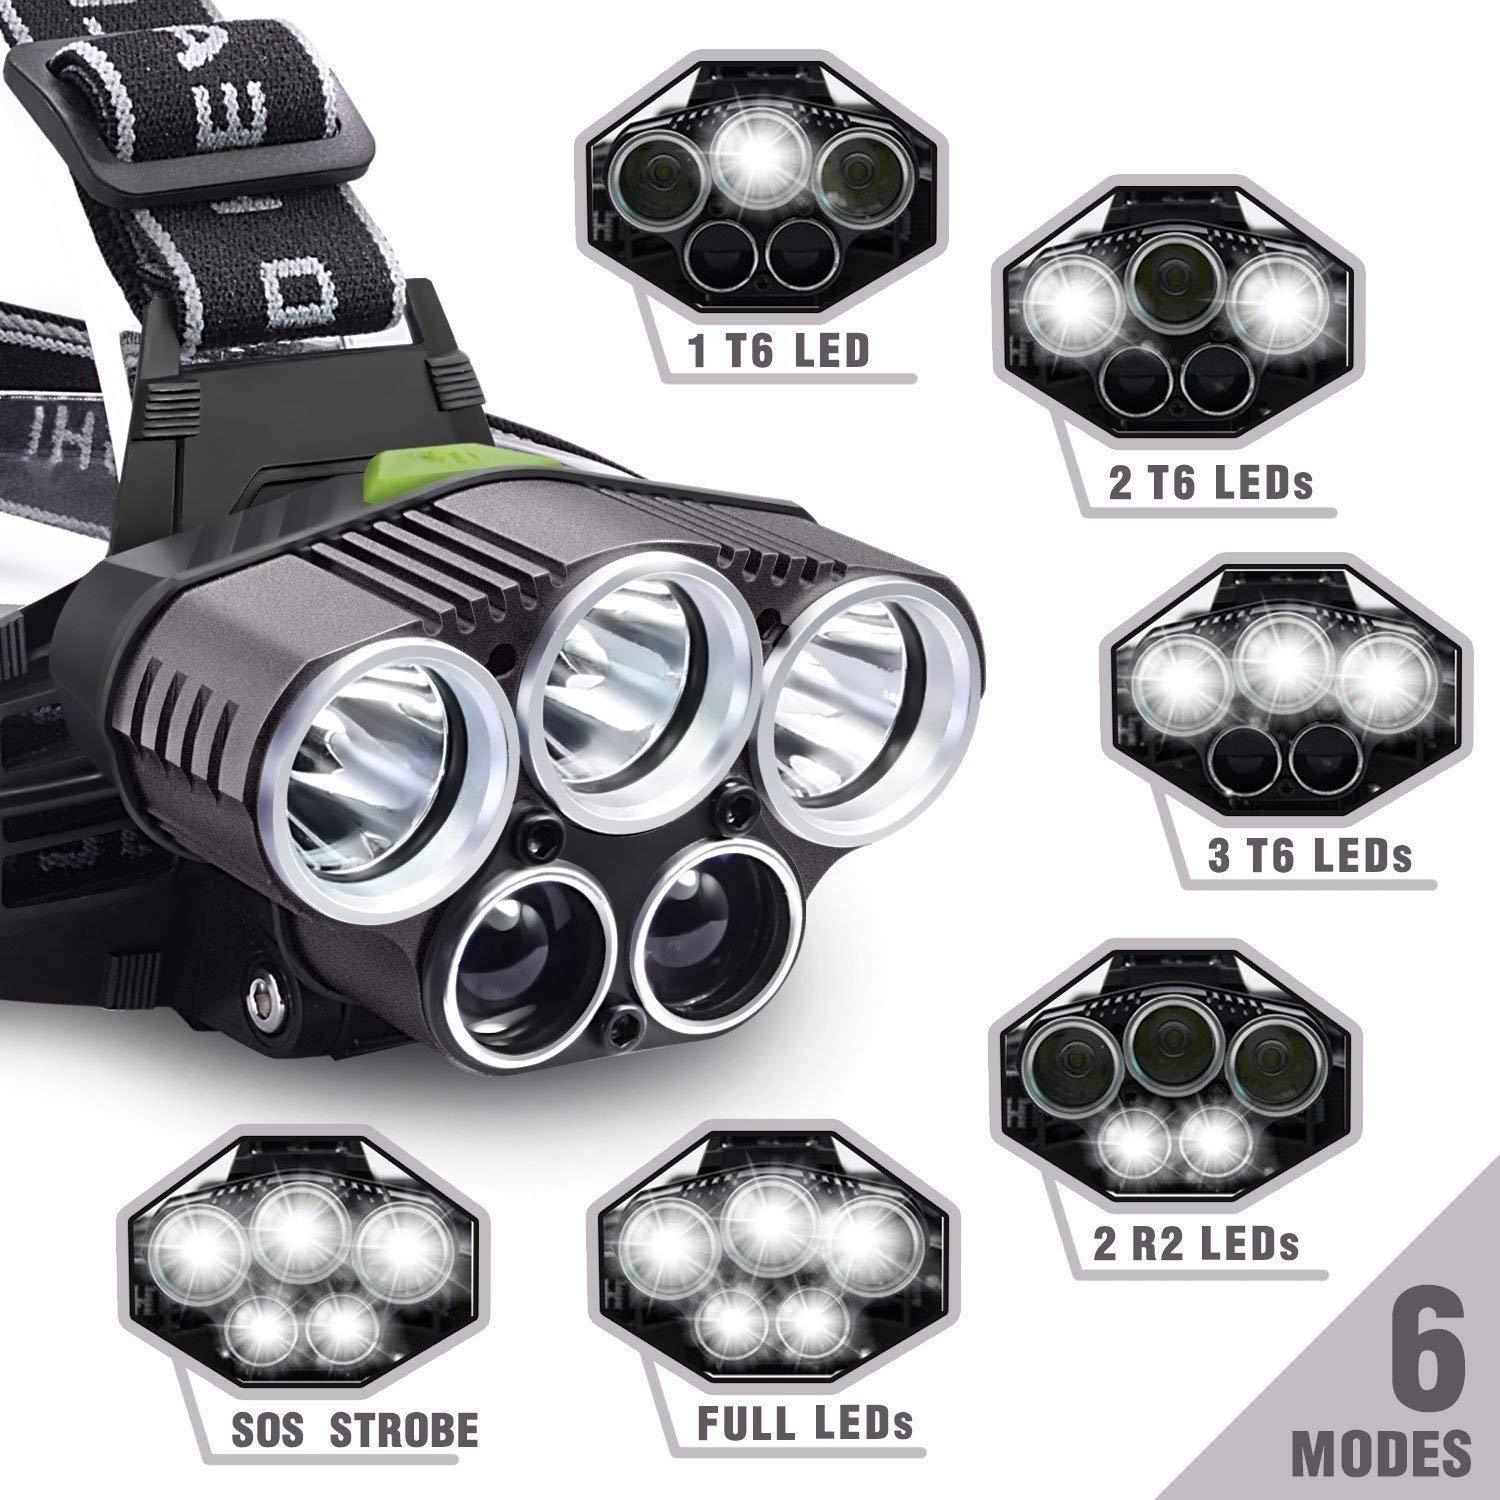 USB Rechargeable Waterproof 50,000 lumens LED Torch Headlamp